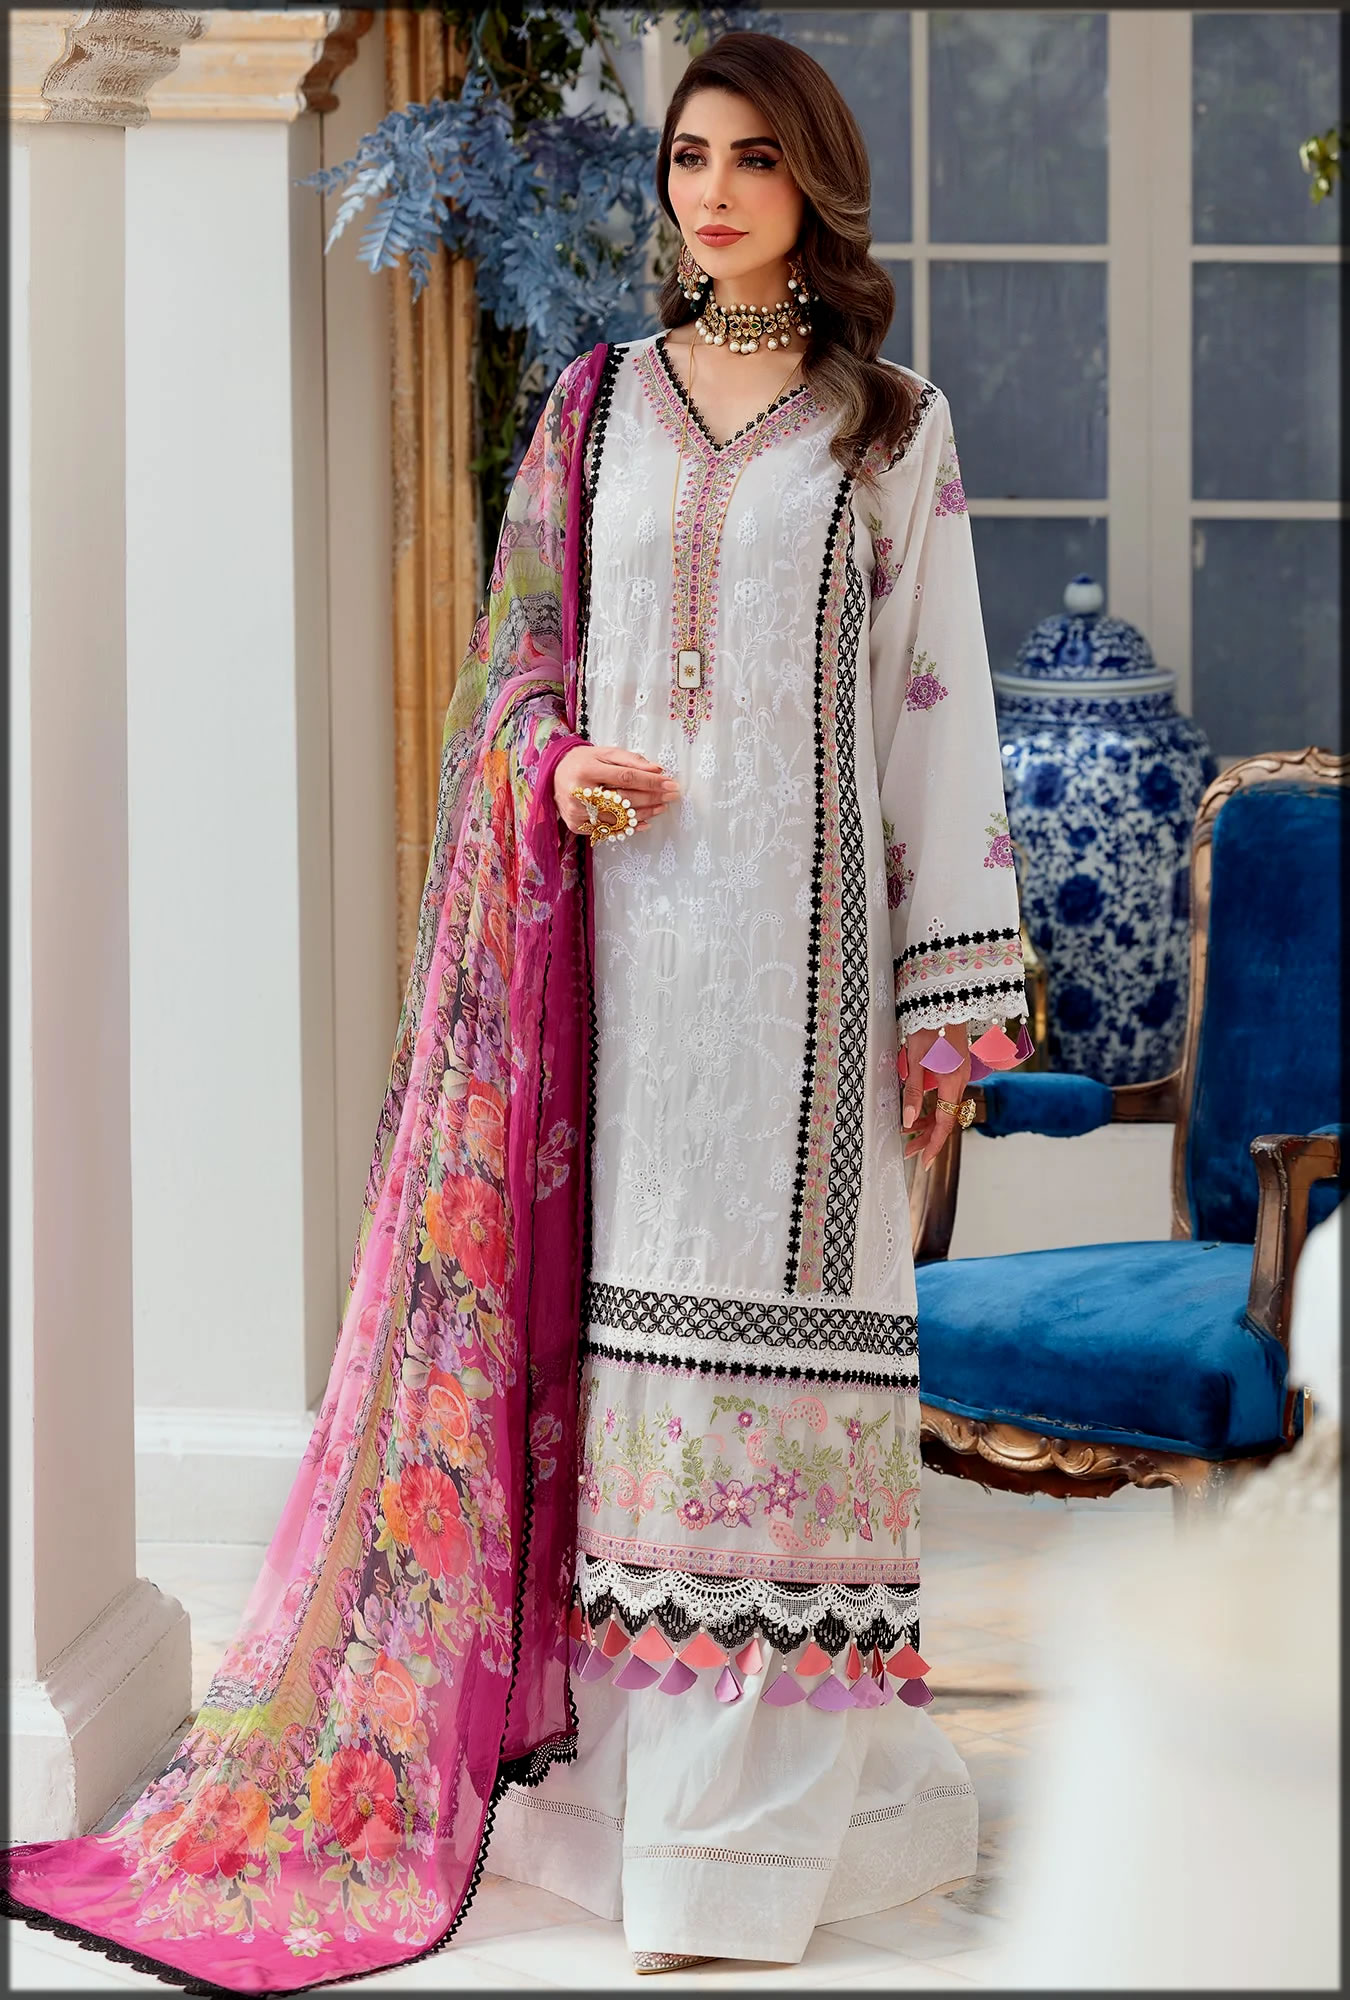 latest noor by sadia asad summer collection for women